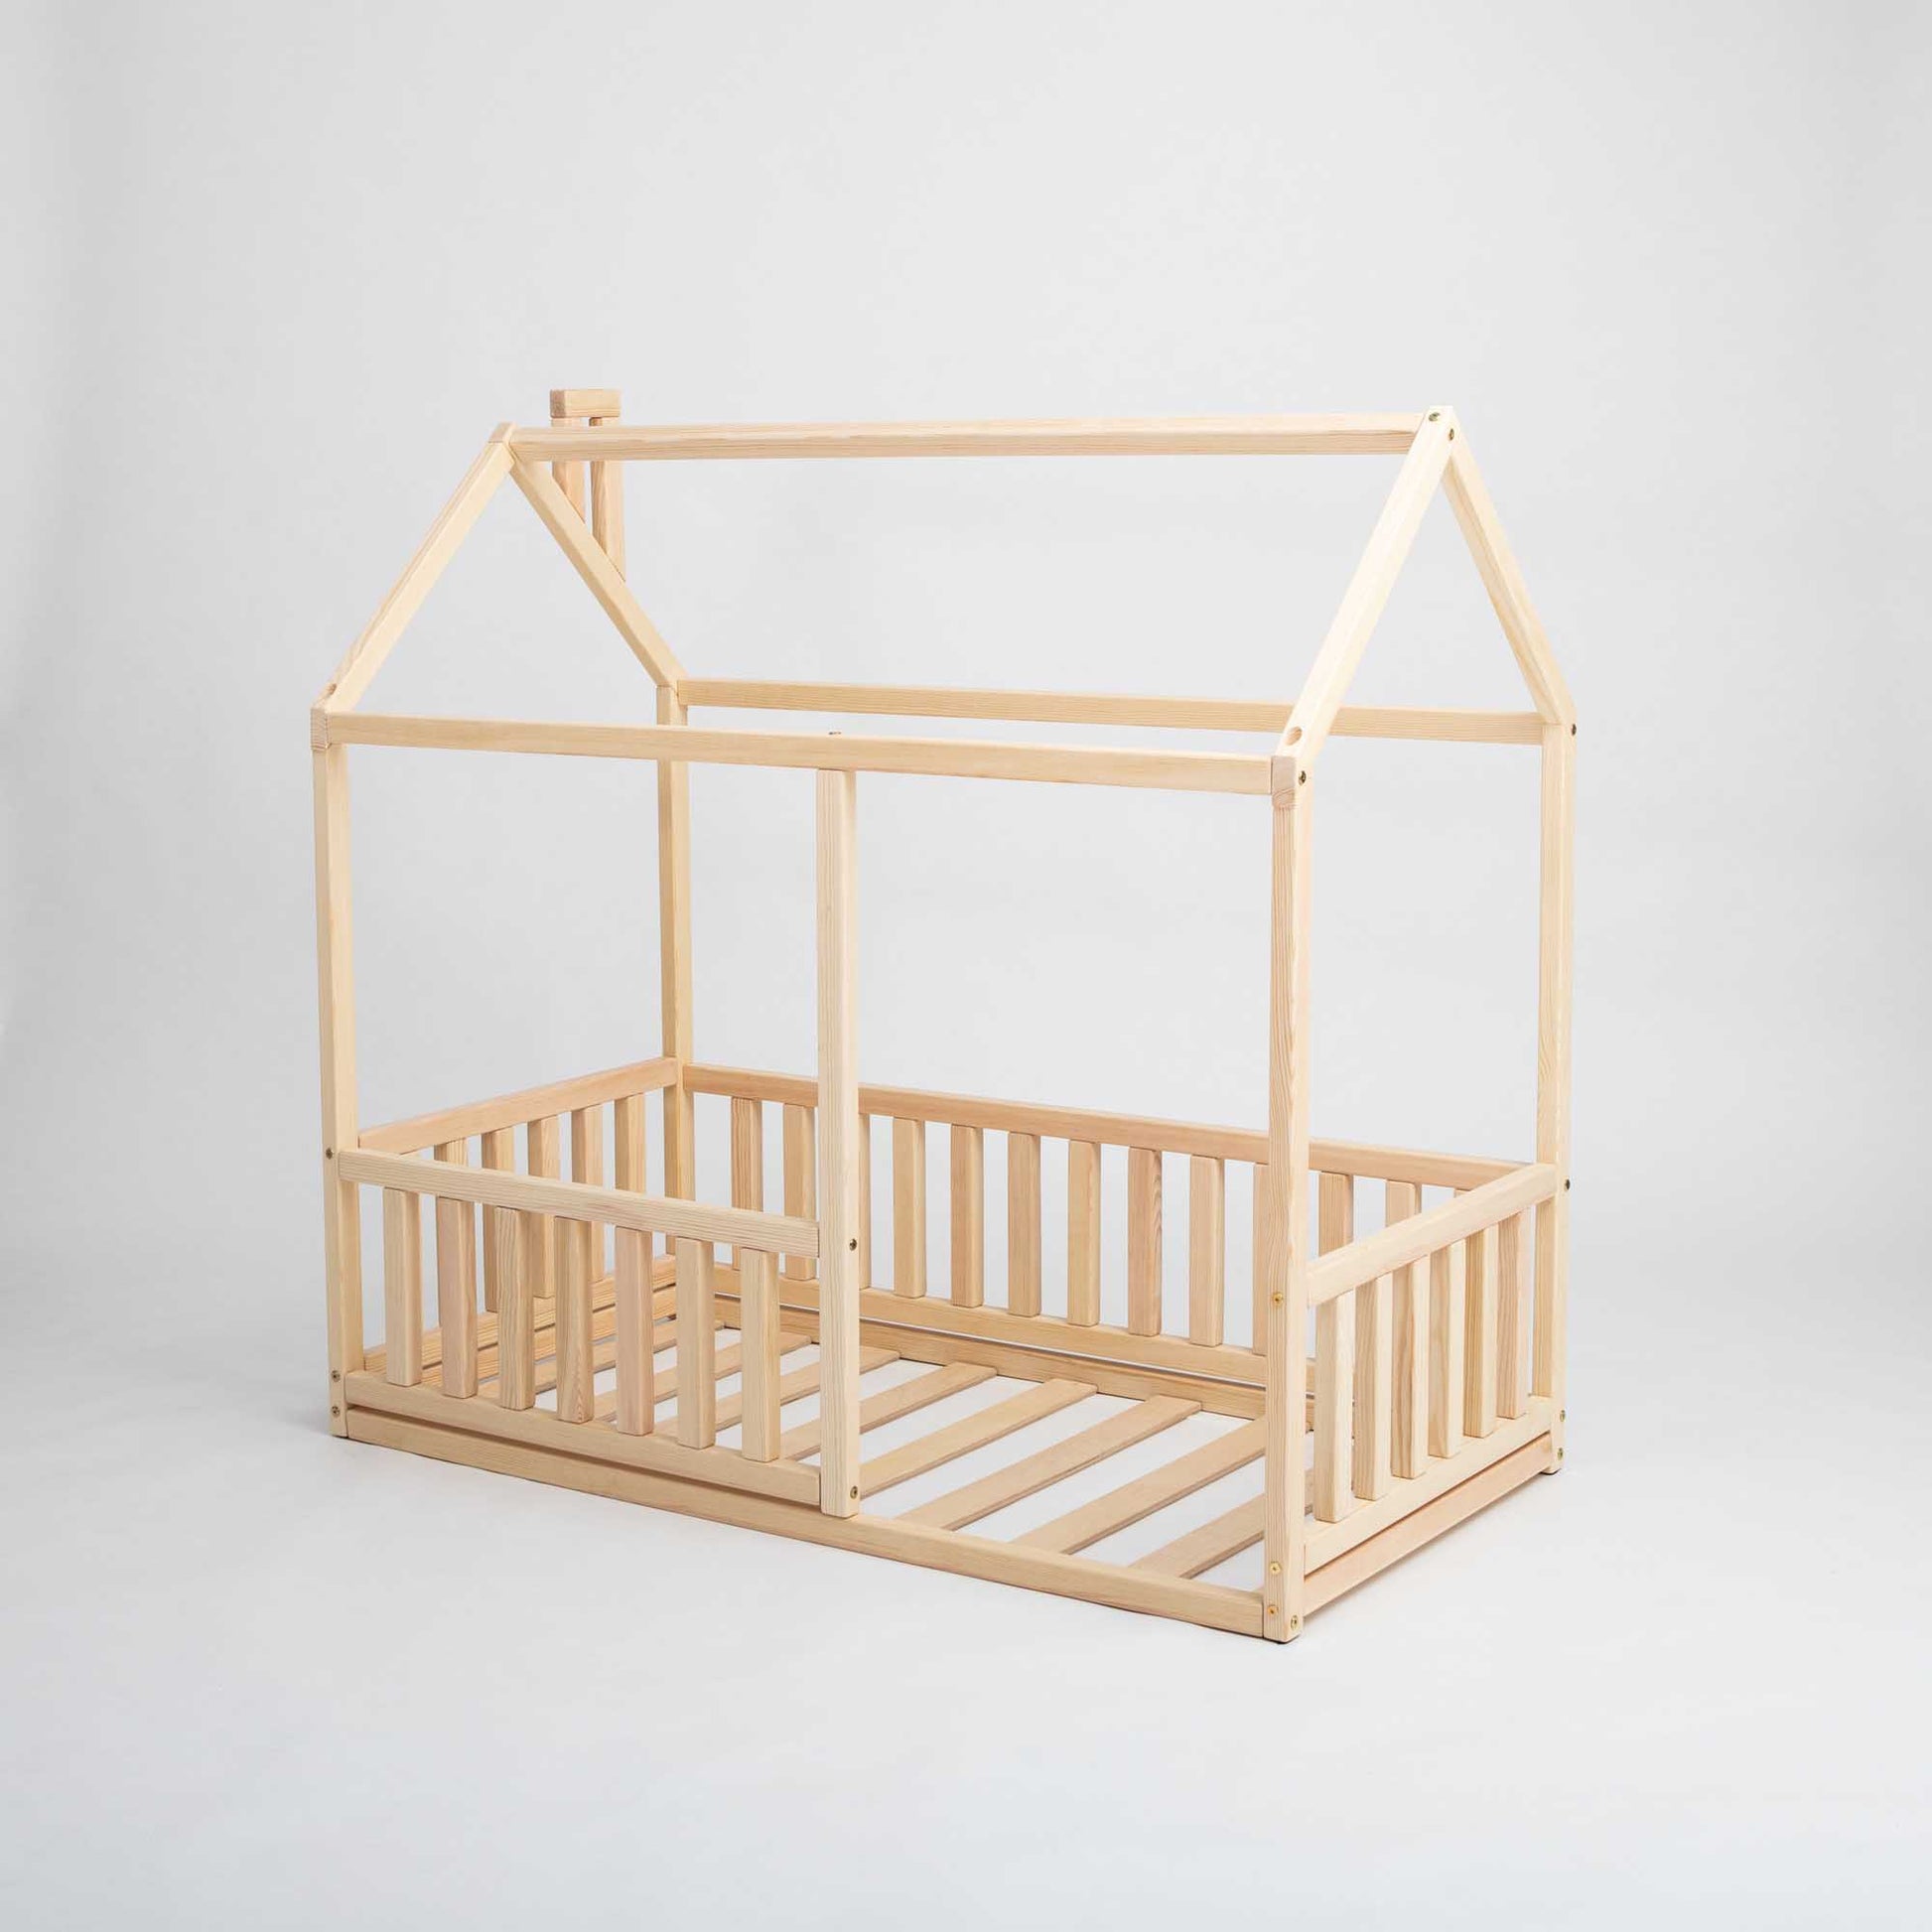 A cozy Sweet Home From Wood Montessori floor house bed with rails and a slatted roof.